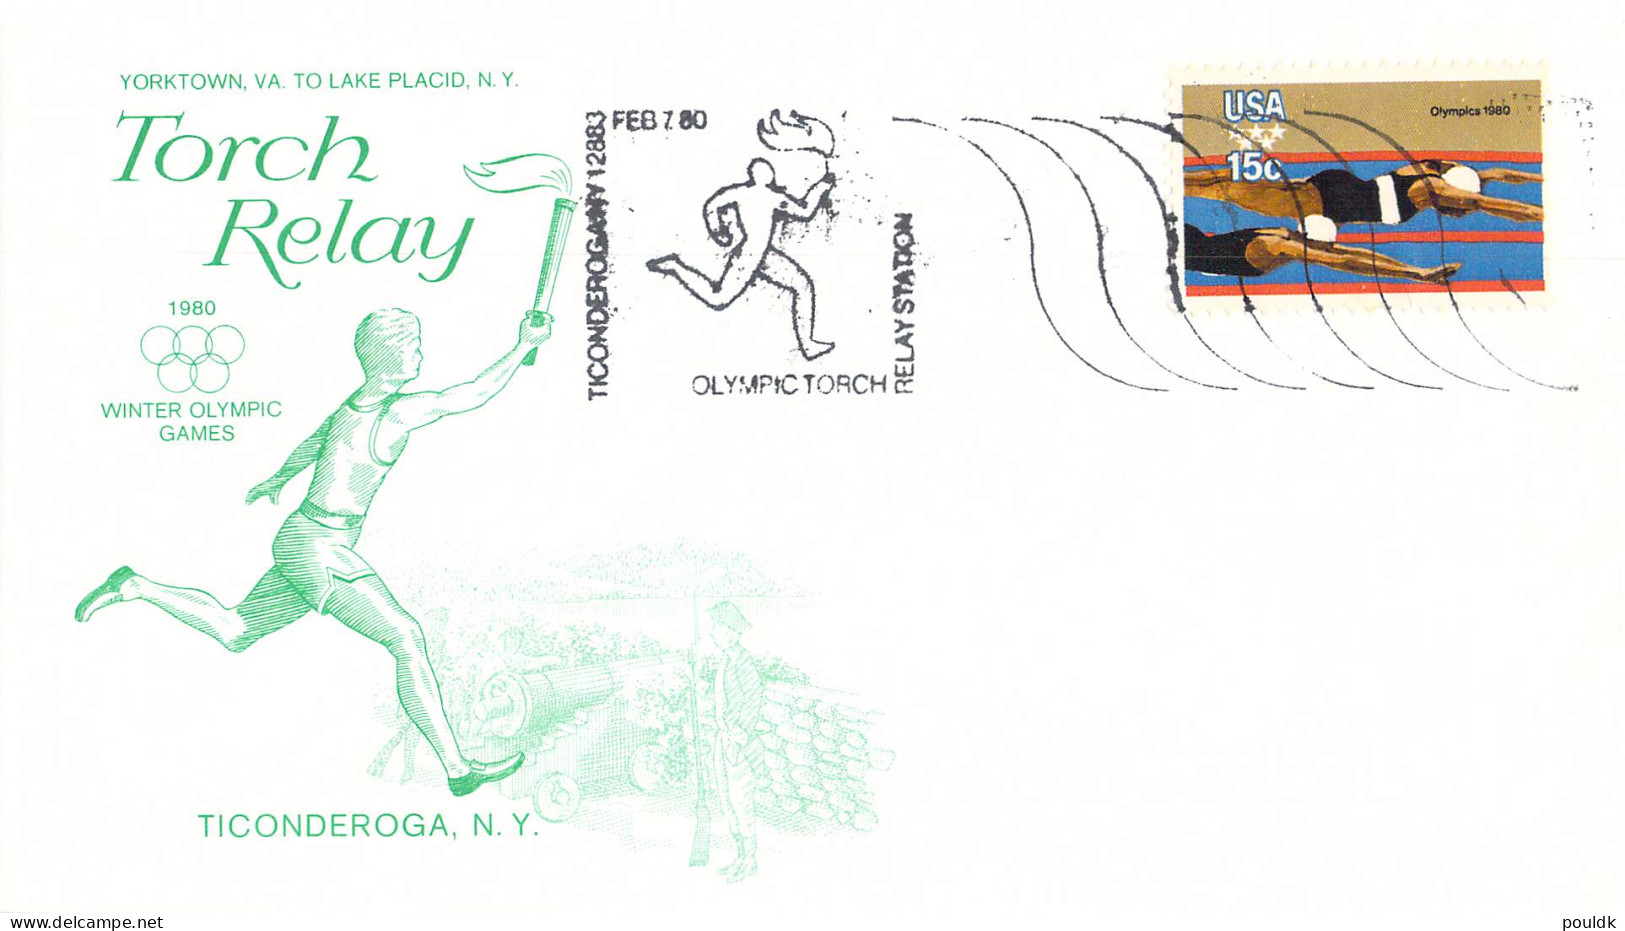 Olympic Games in Lake Placid 1980 - 12 Torch relay covers from USA. Postal weight approx 0,090 kg. Please read